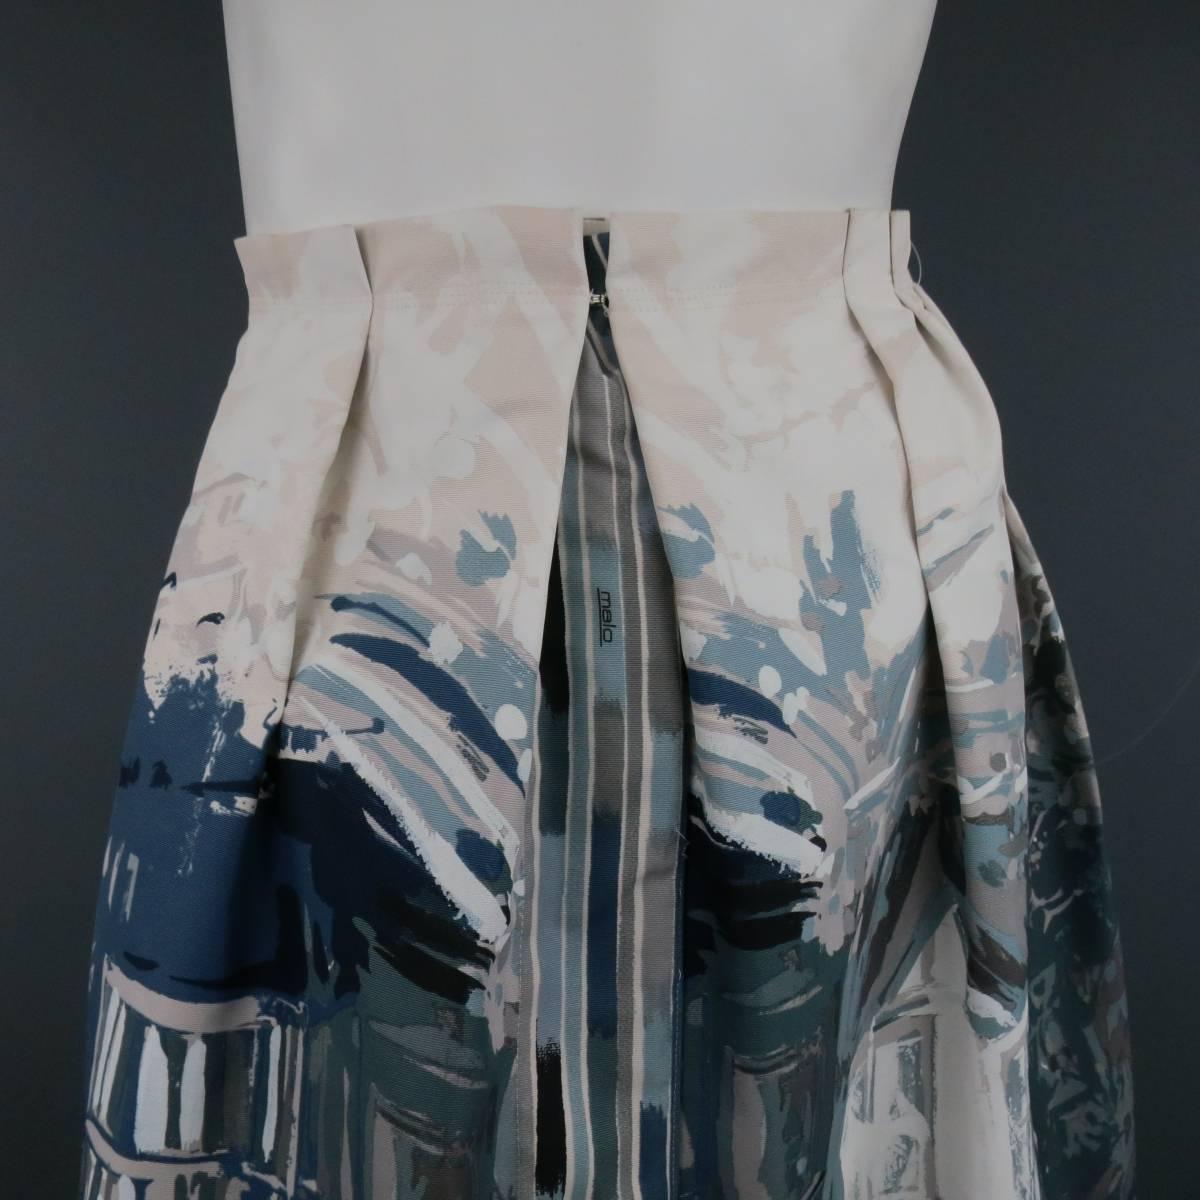 MALO taffeta skirt features gathered pleats with a watercolor-esque design in varying shades of blues and gray. Skirt features front slit, three button and hook and eye closure and is unlined.
 
Excellent Pre-Owned Condition. Retails at